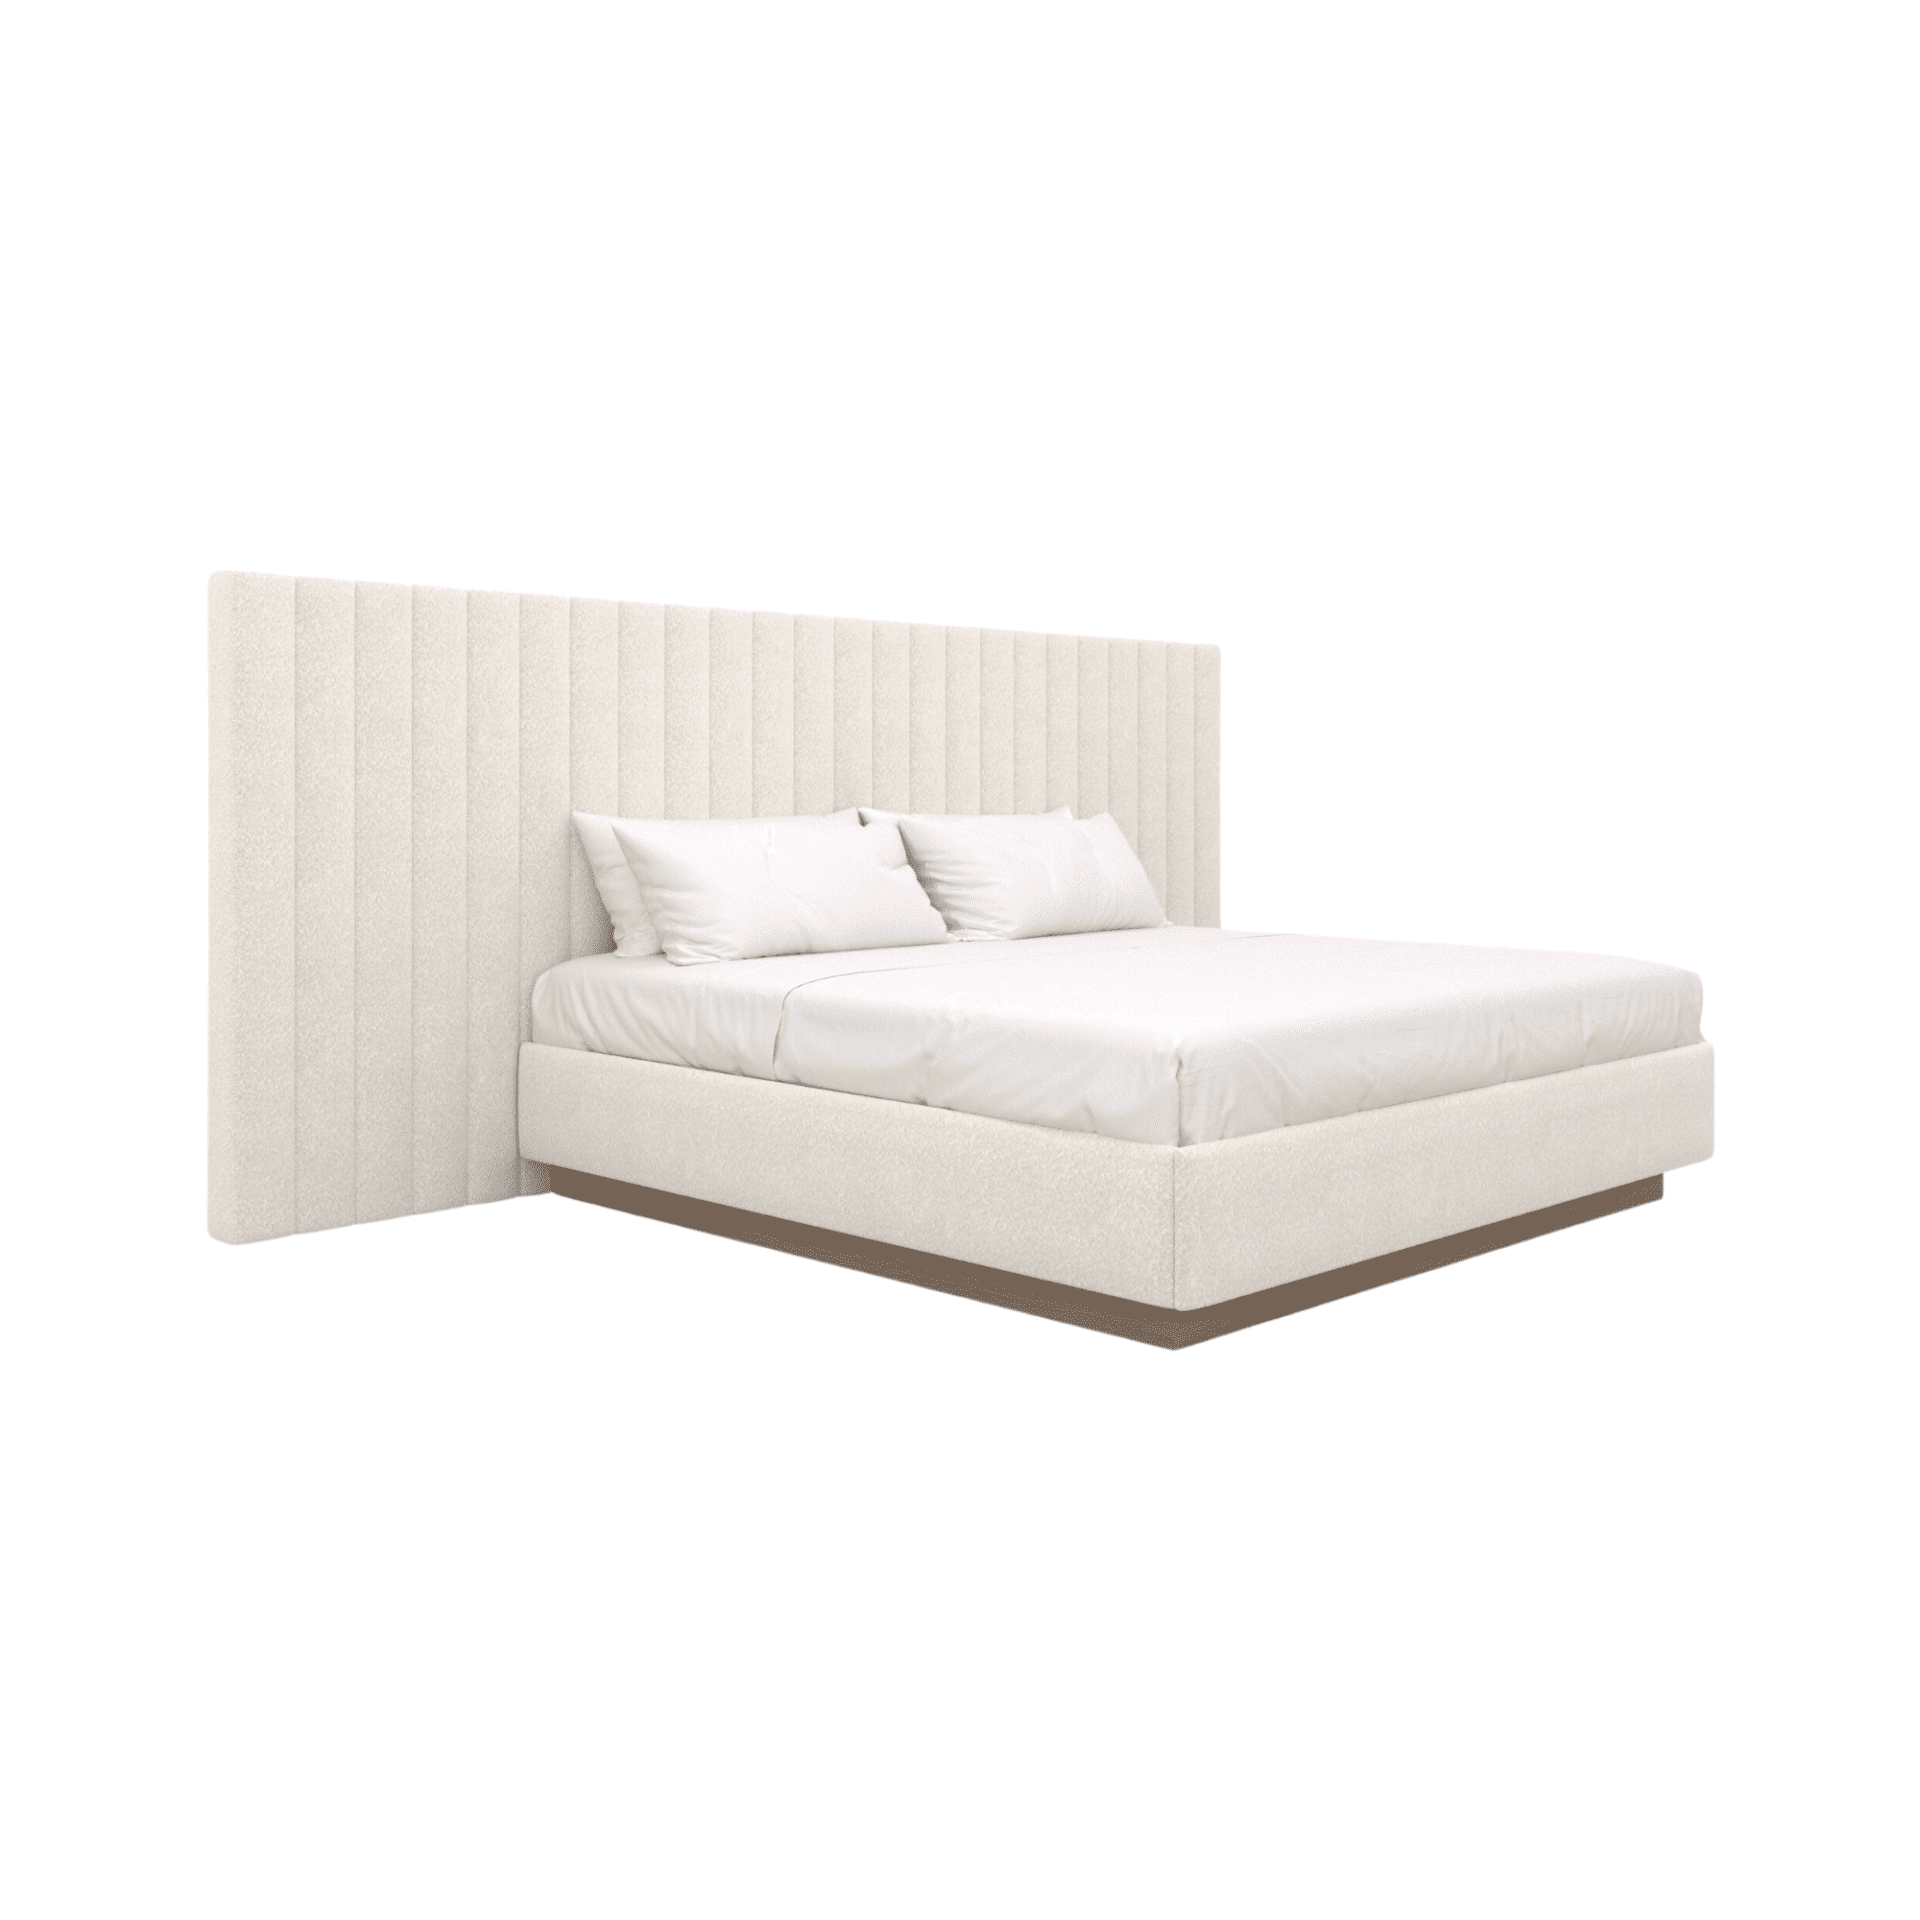 CONCORD-freestanding-upholstered-headboard-bed-luxury-furniture-blend-home-furnishings